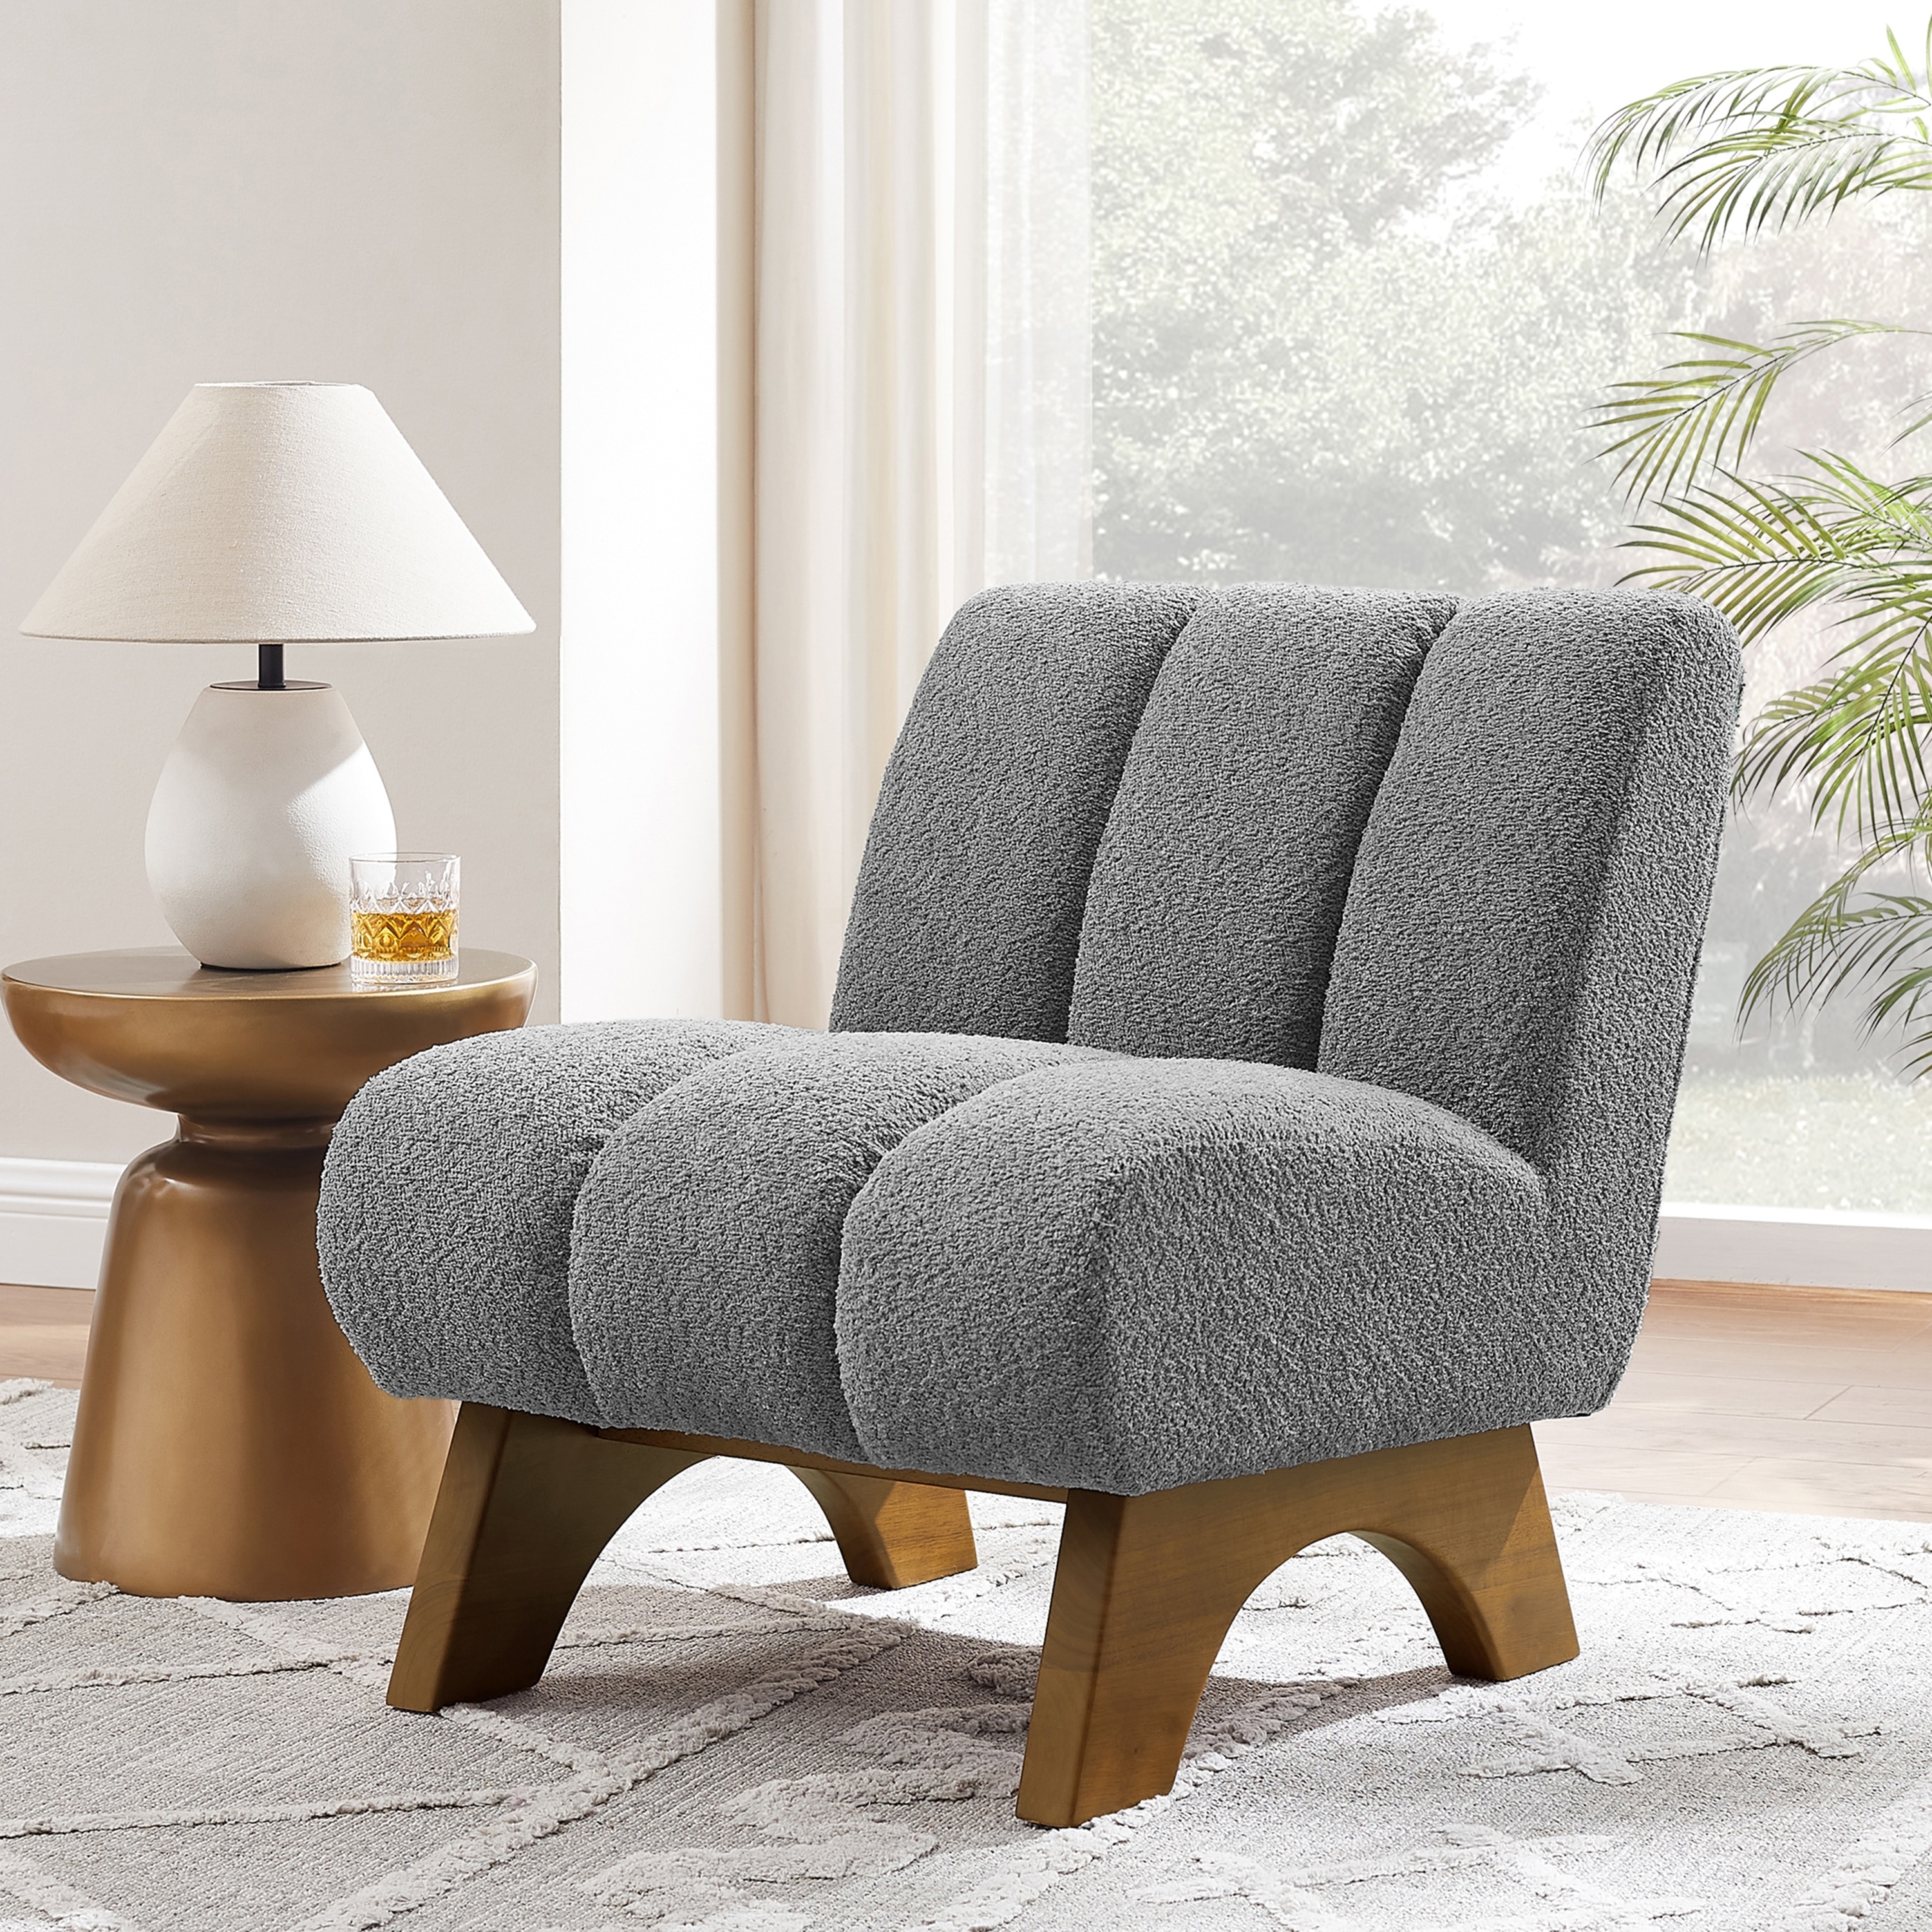 Art Leon Modern Wood and Fabric Accent Sofa Chair